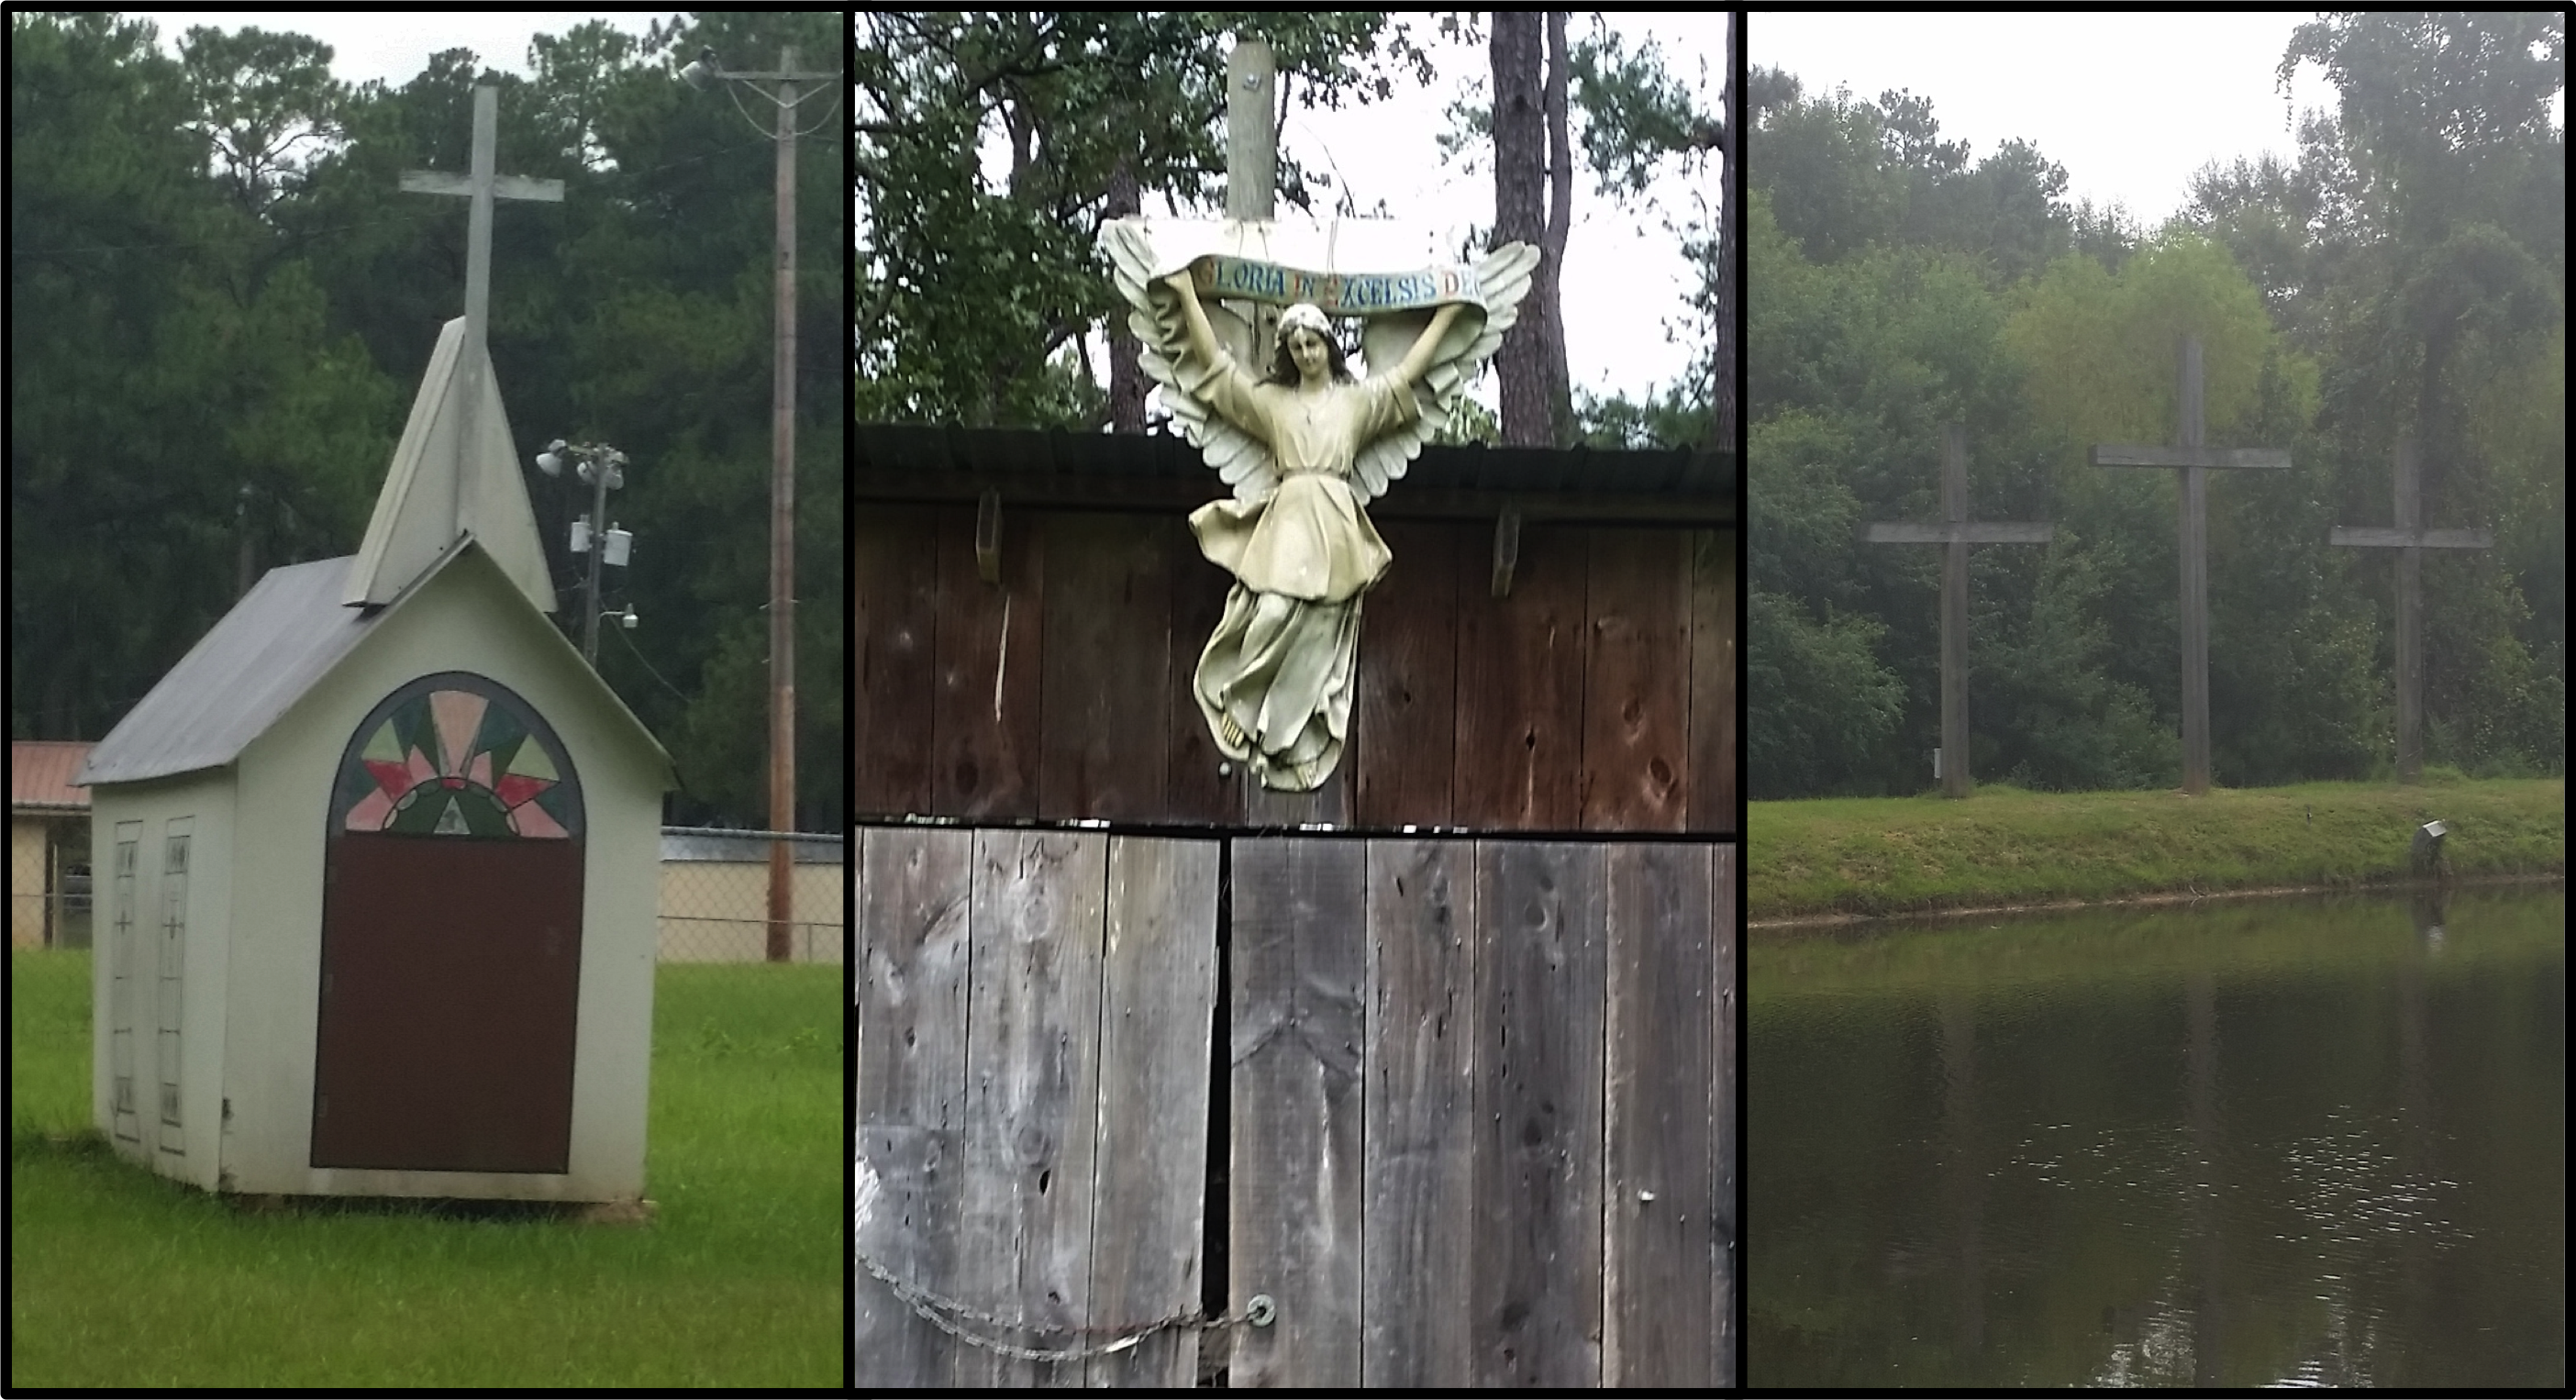 More religious displays in Collins, Miss.